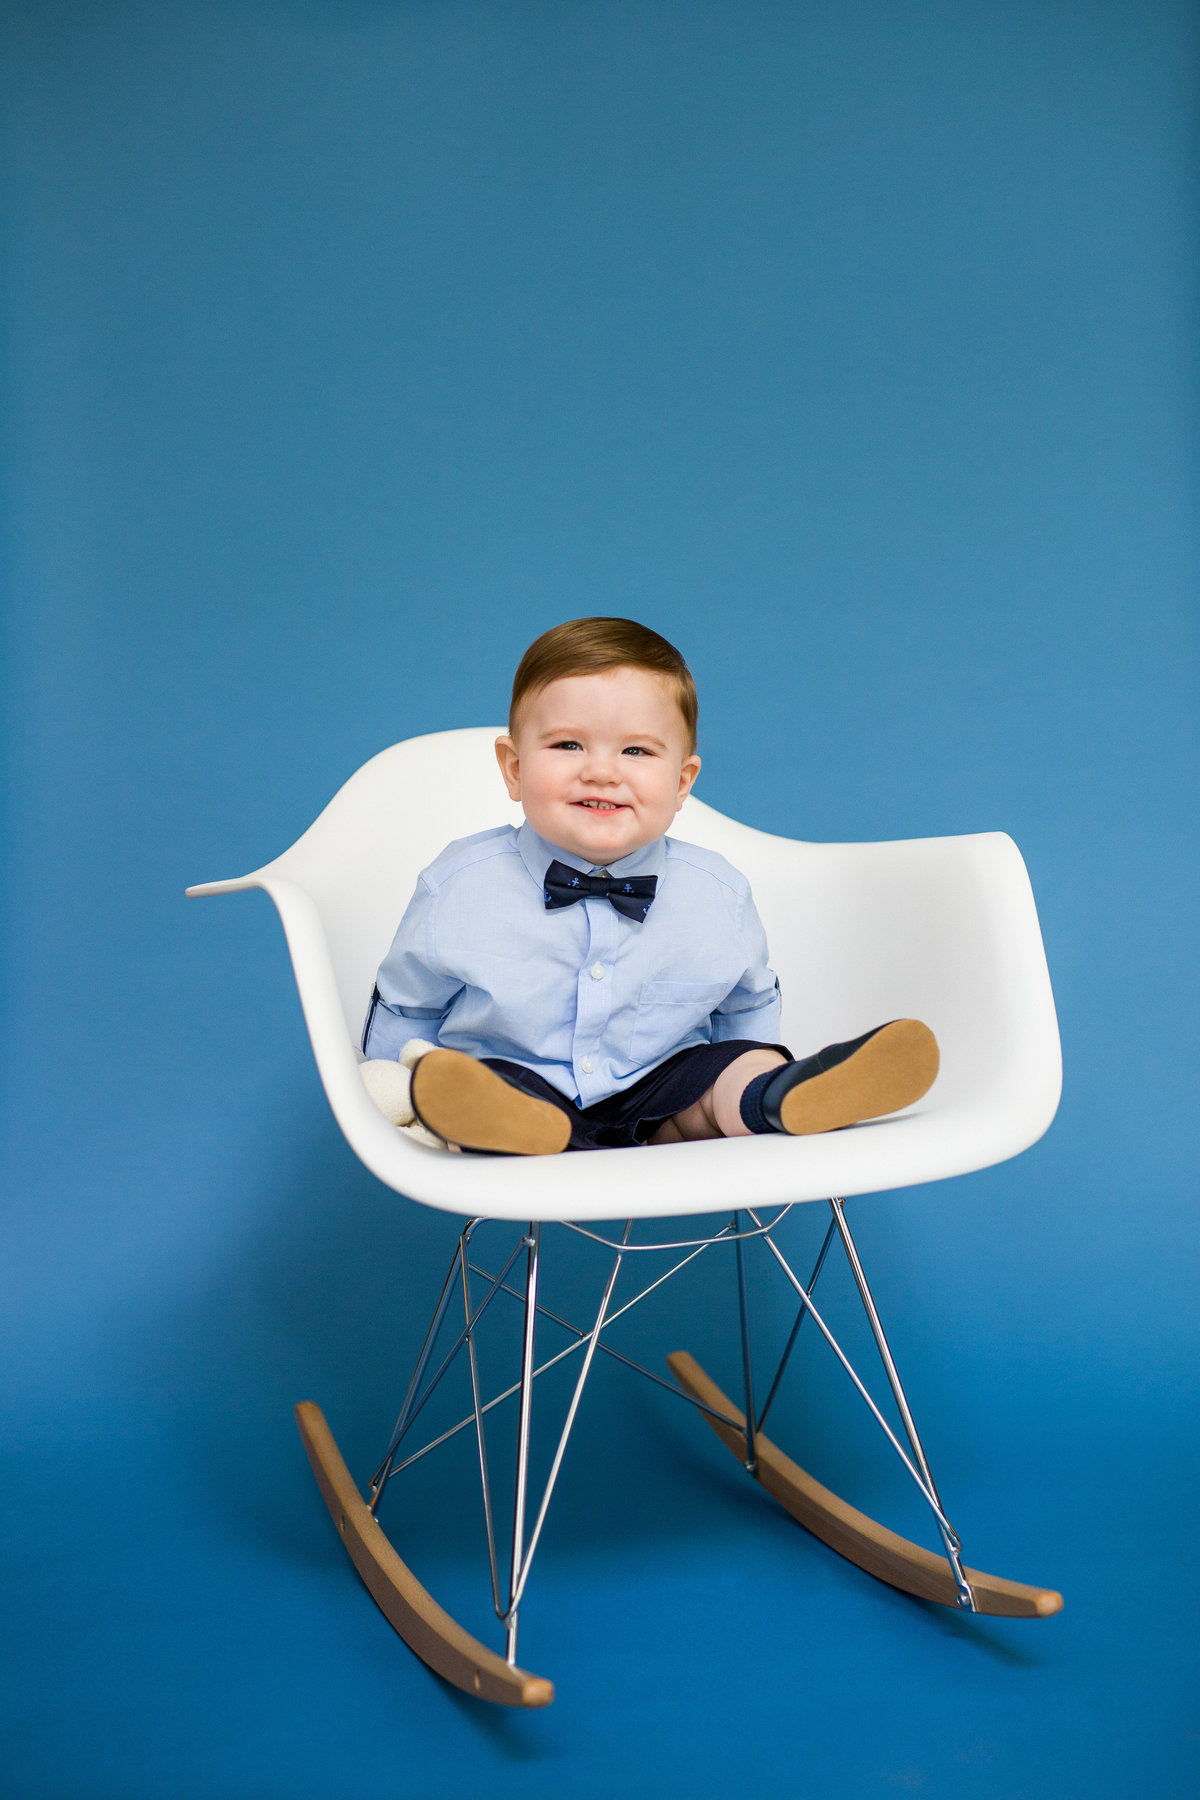 Baby sitting in Eames Molded Plastic Armchair Rocker chair on blue backdrop for baby's first year photography session.